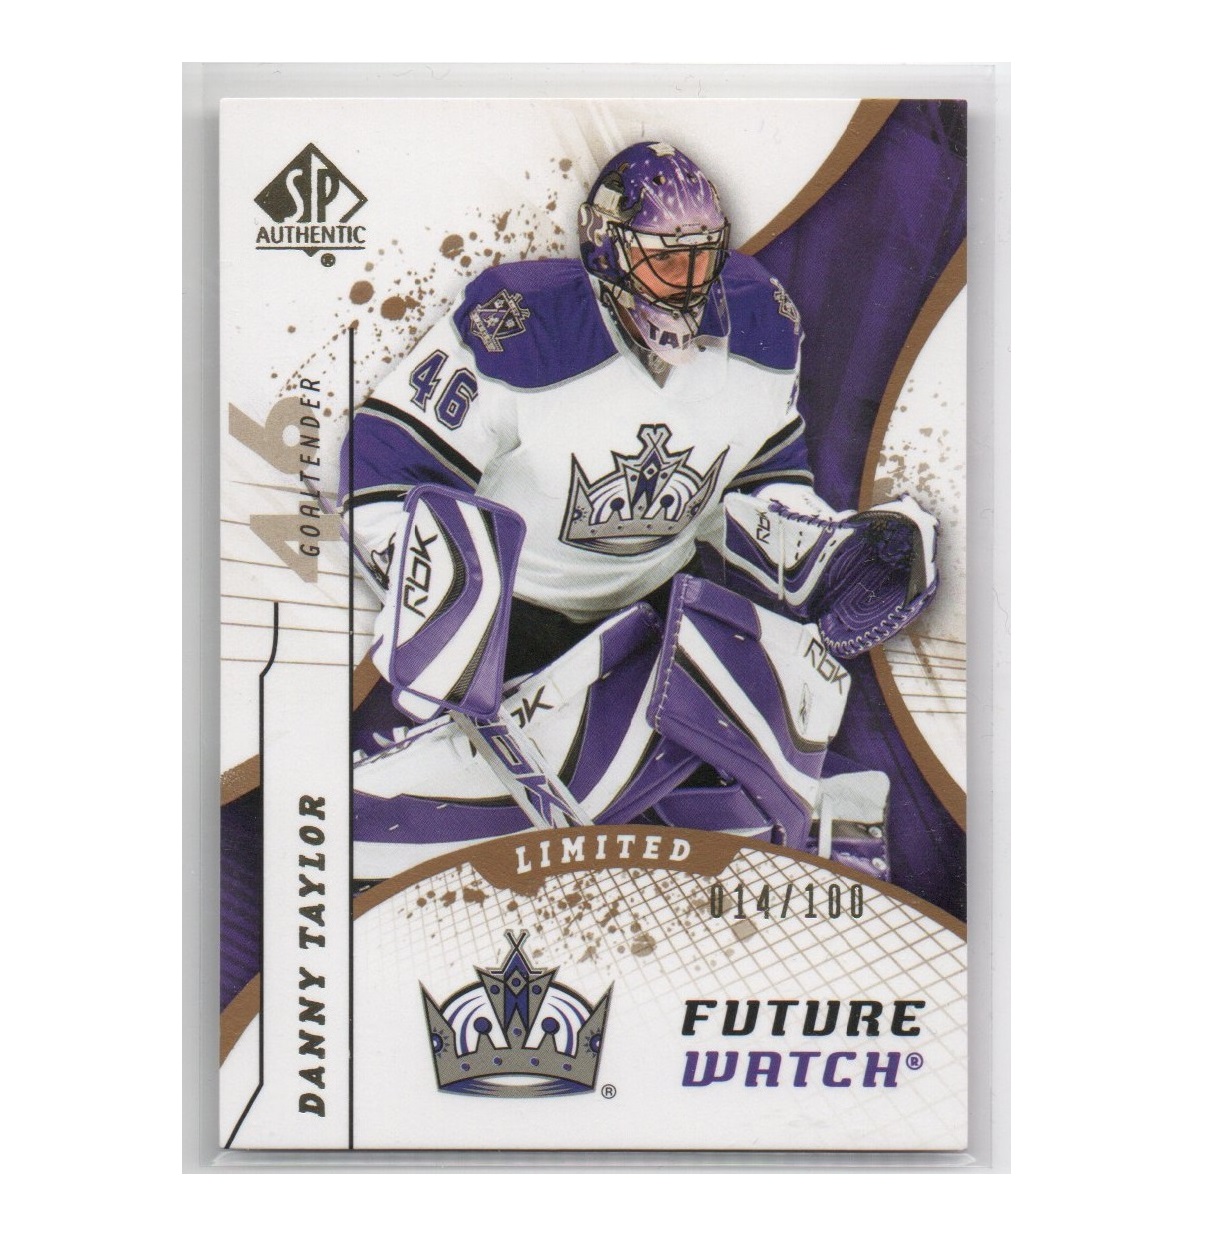 2008-09 SP Authentic Limited #223 Danny Taylor (40-X29-NHLKINGS)